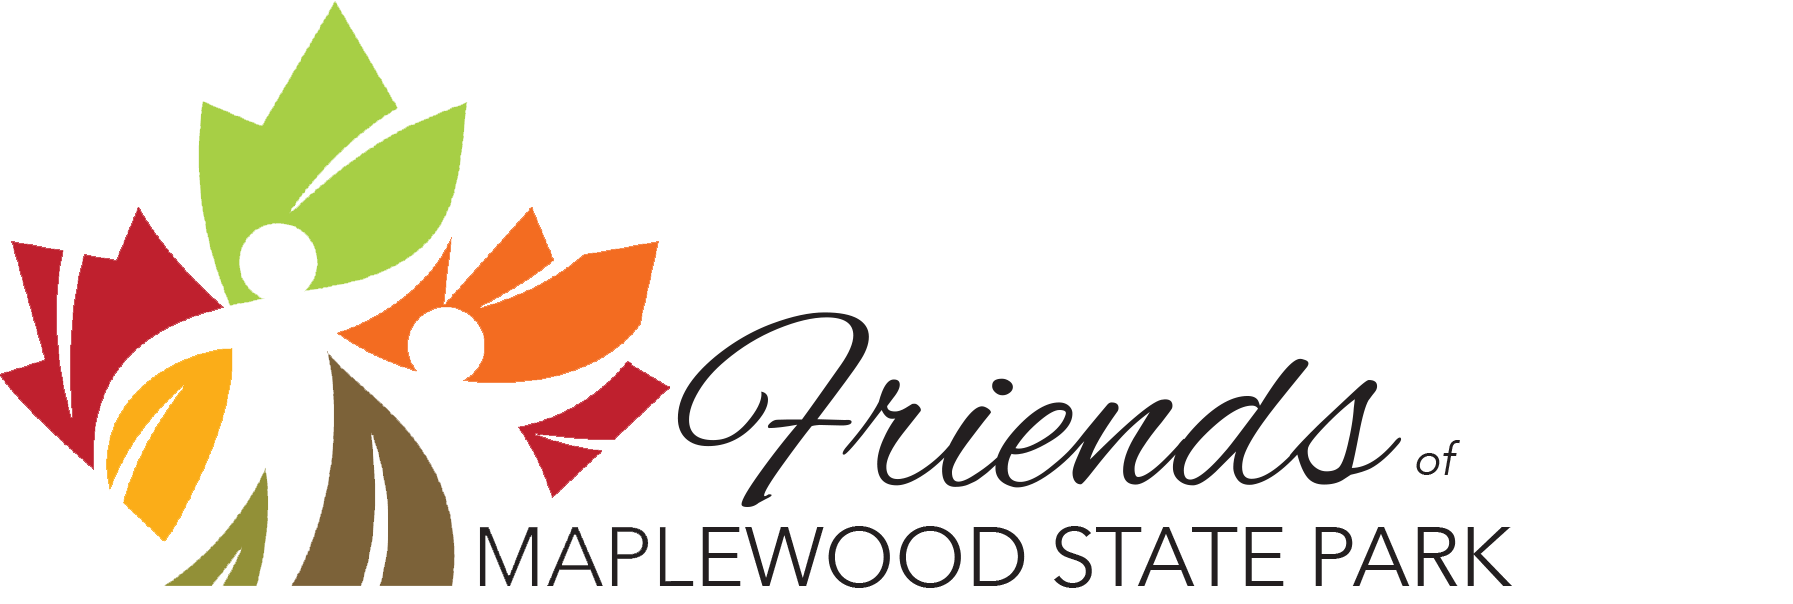 Friends of Maplewood State Park